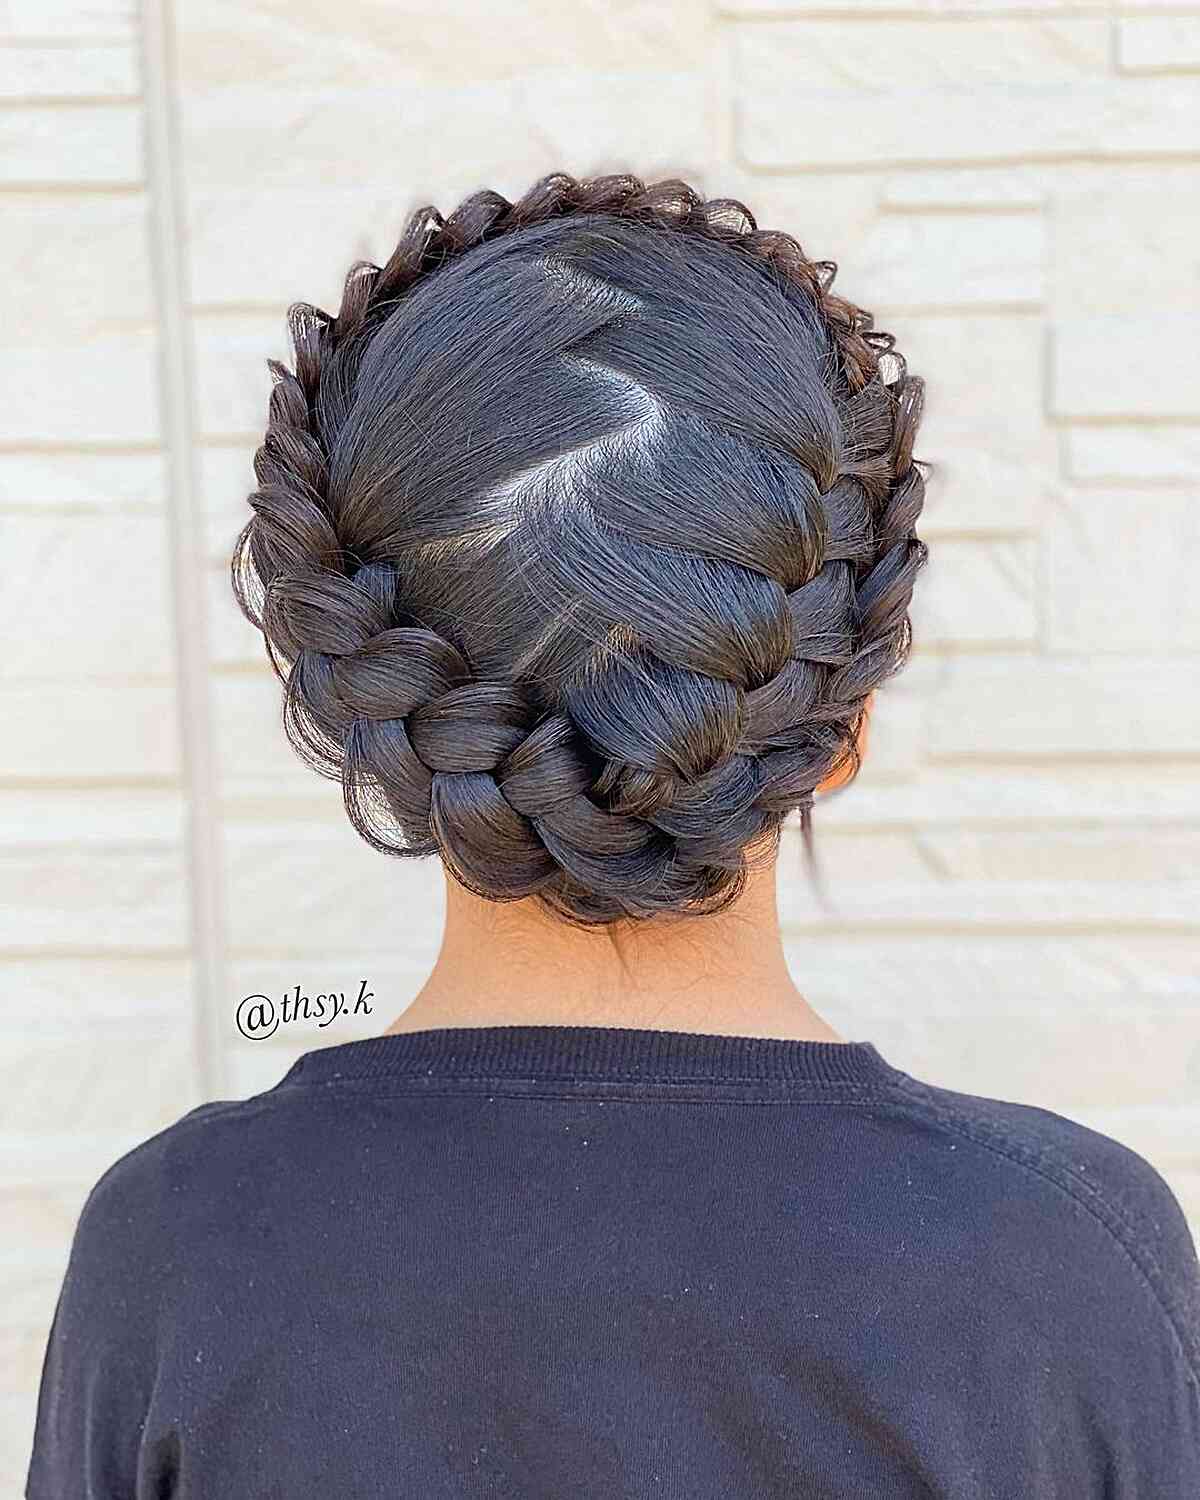 Medieval-Style Halo Crown Braid with Zig-Zag Part